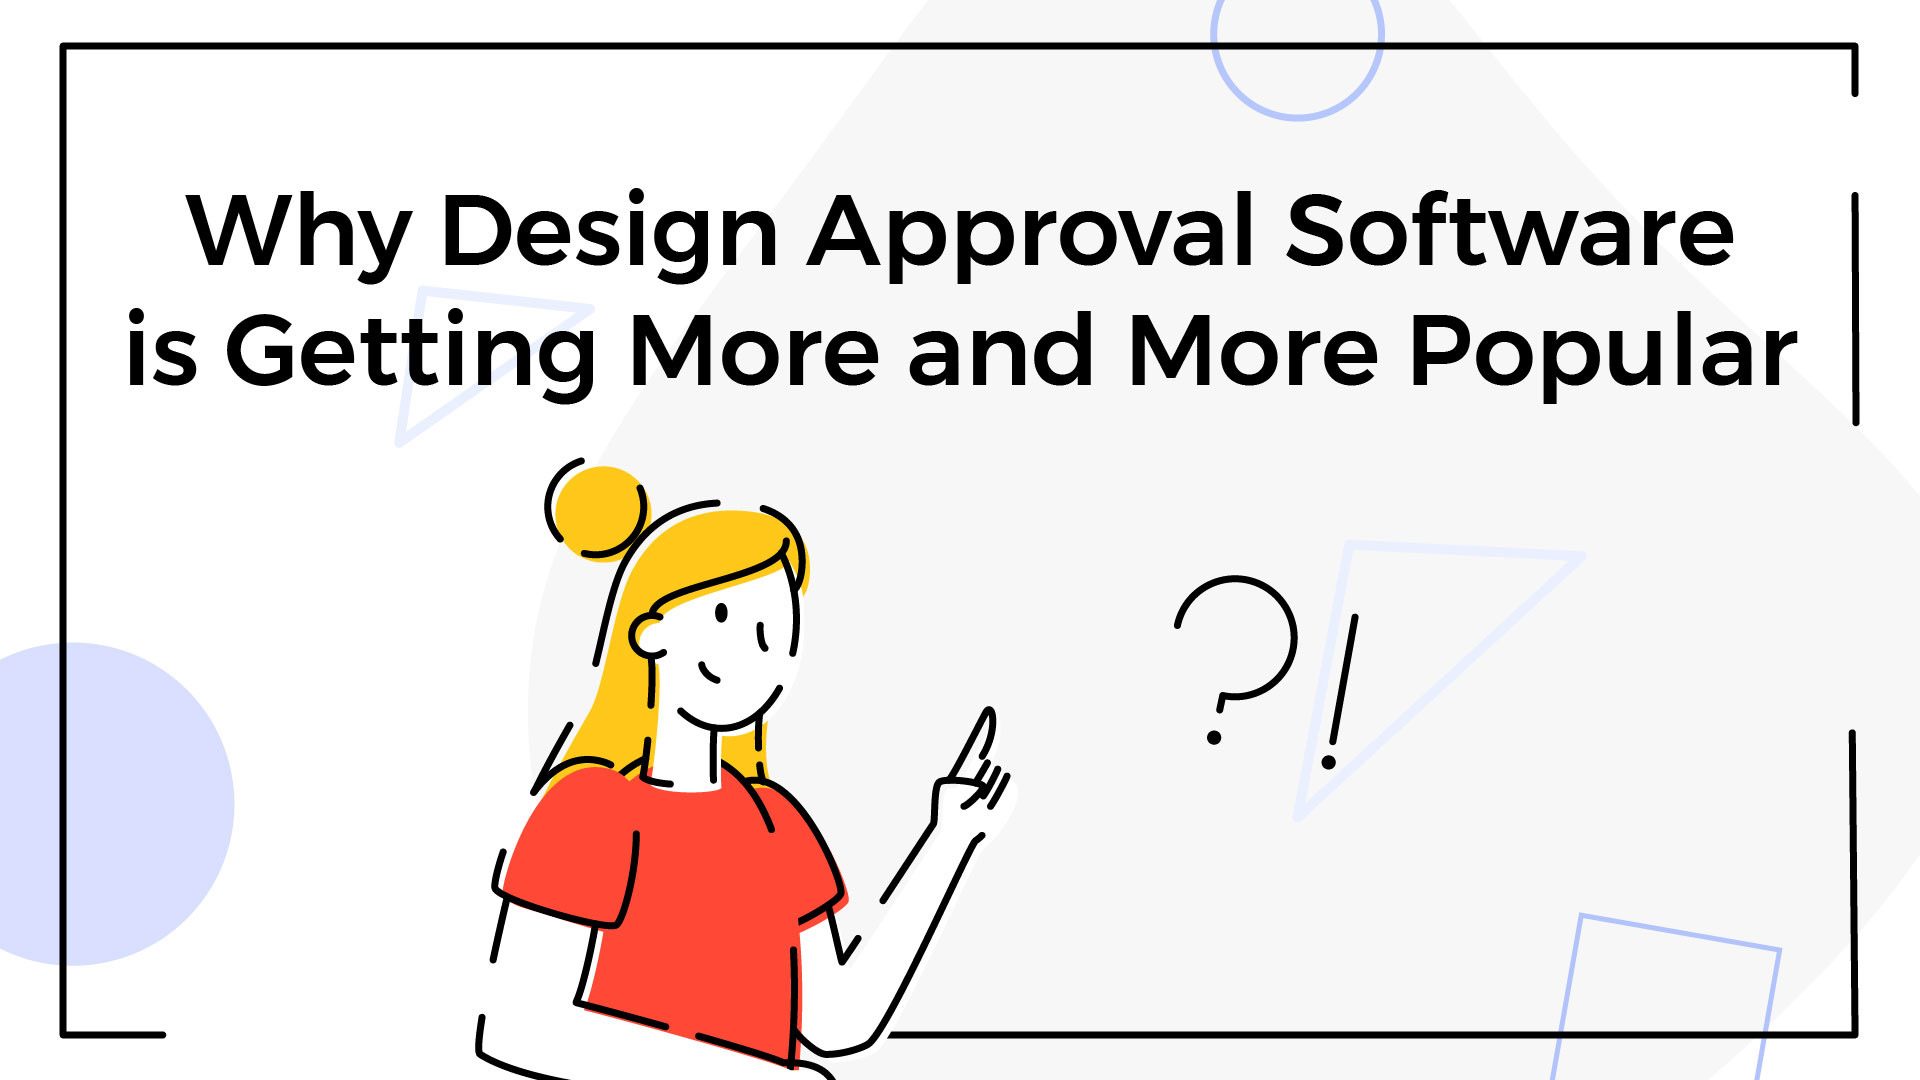 design approval software is getting more popular banner